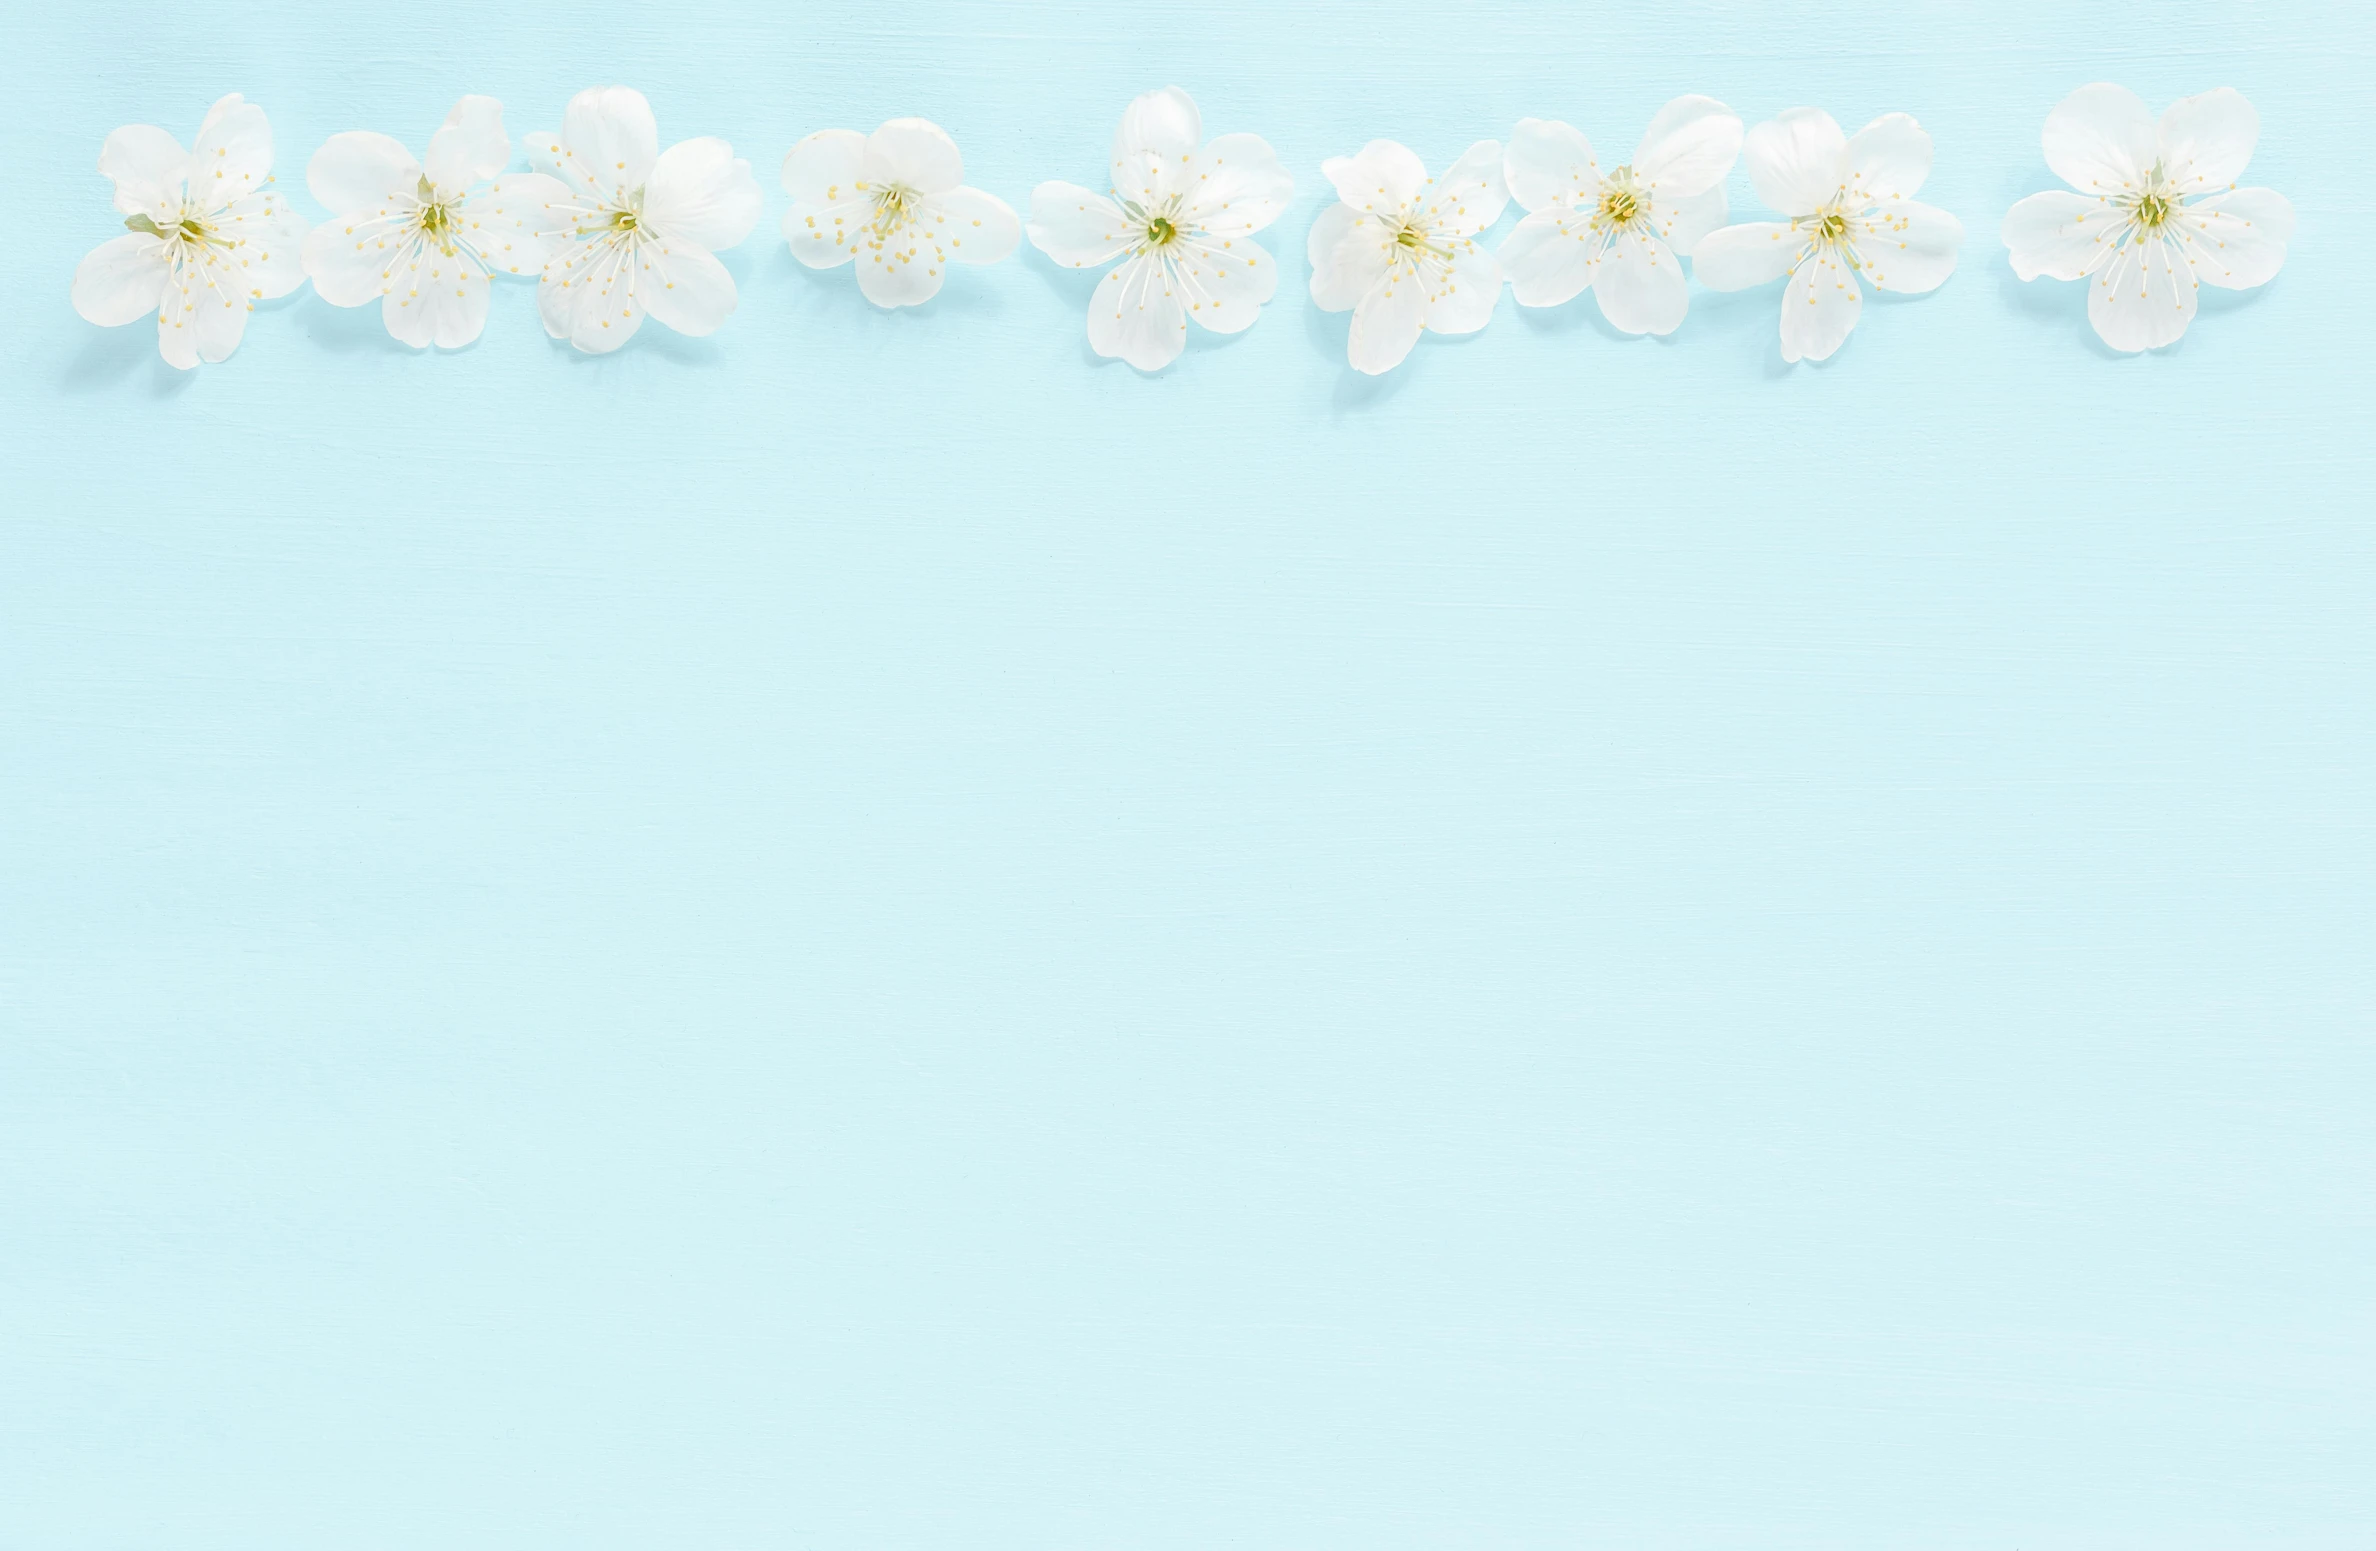 a row of white flowers on a blue background, background image, thumbnail, flower decorations, instagram post